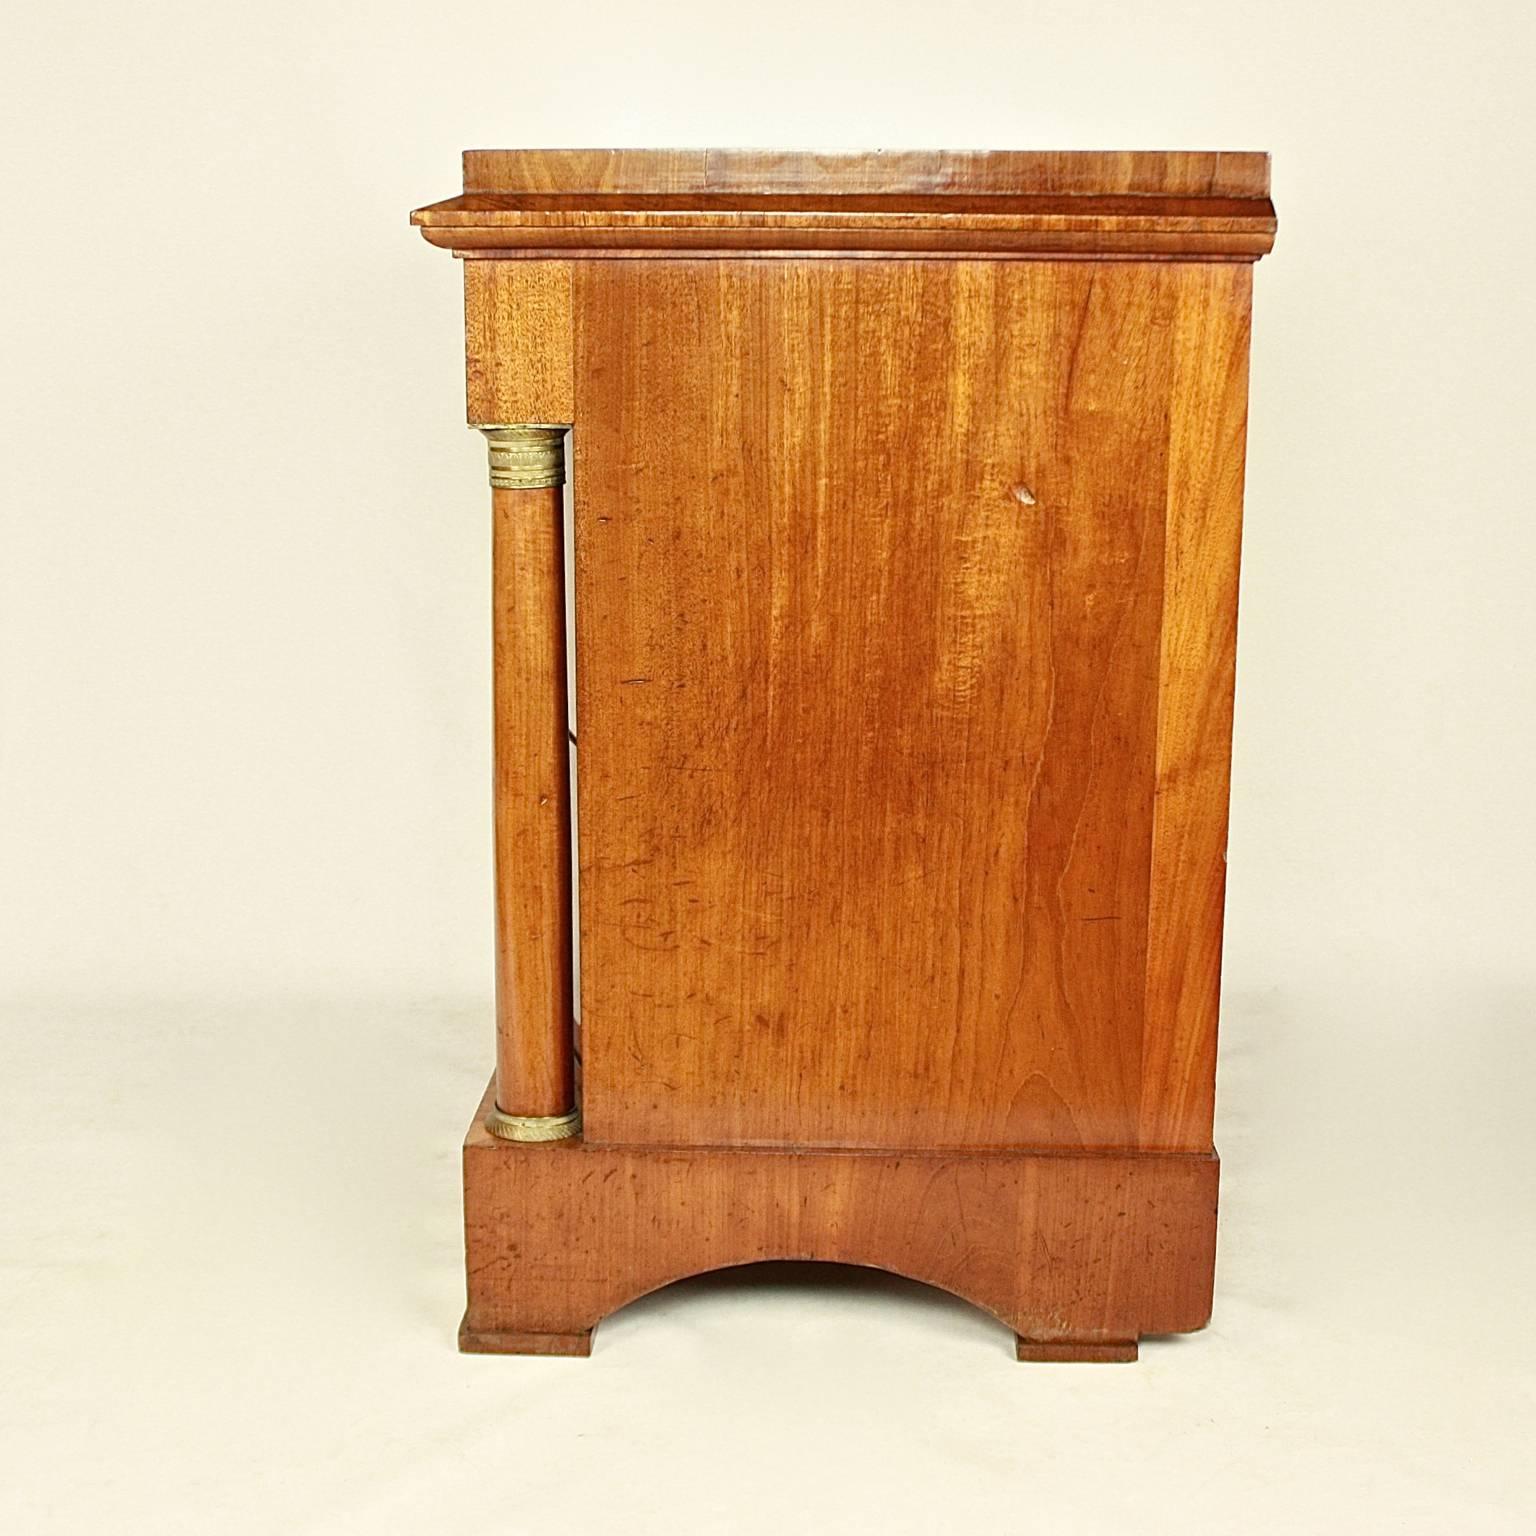 Early 19th Century Rare Mahogany Biedermeier Commode or Chest of Drawers, circa 1815